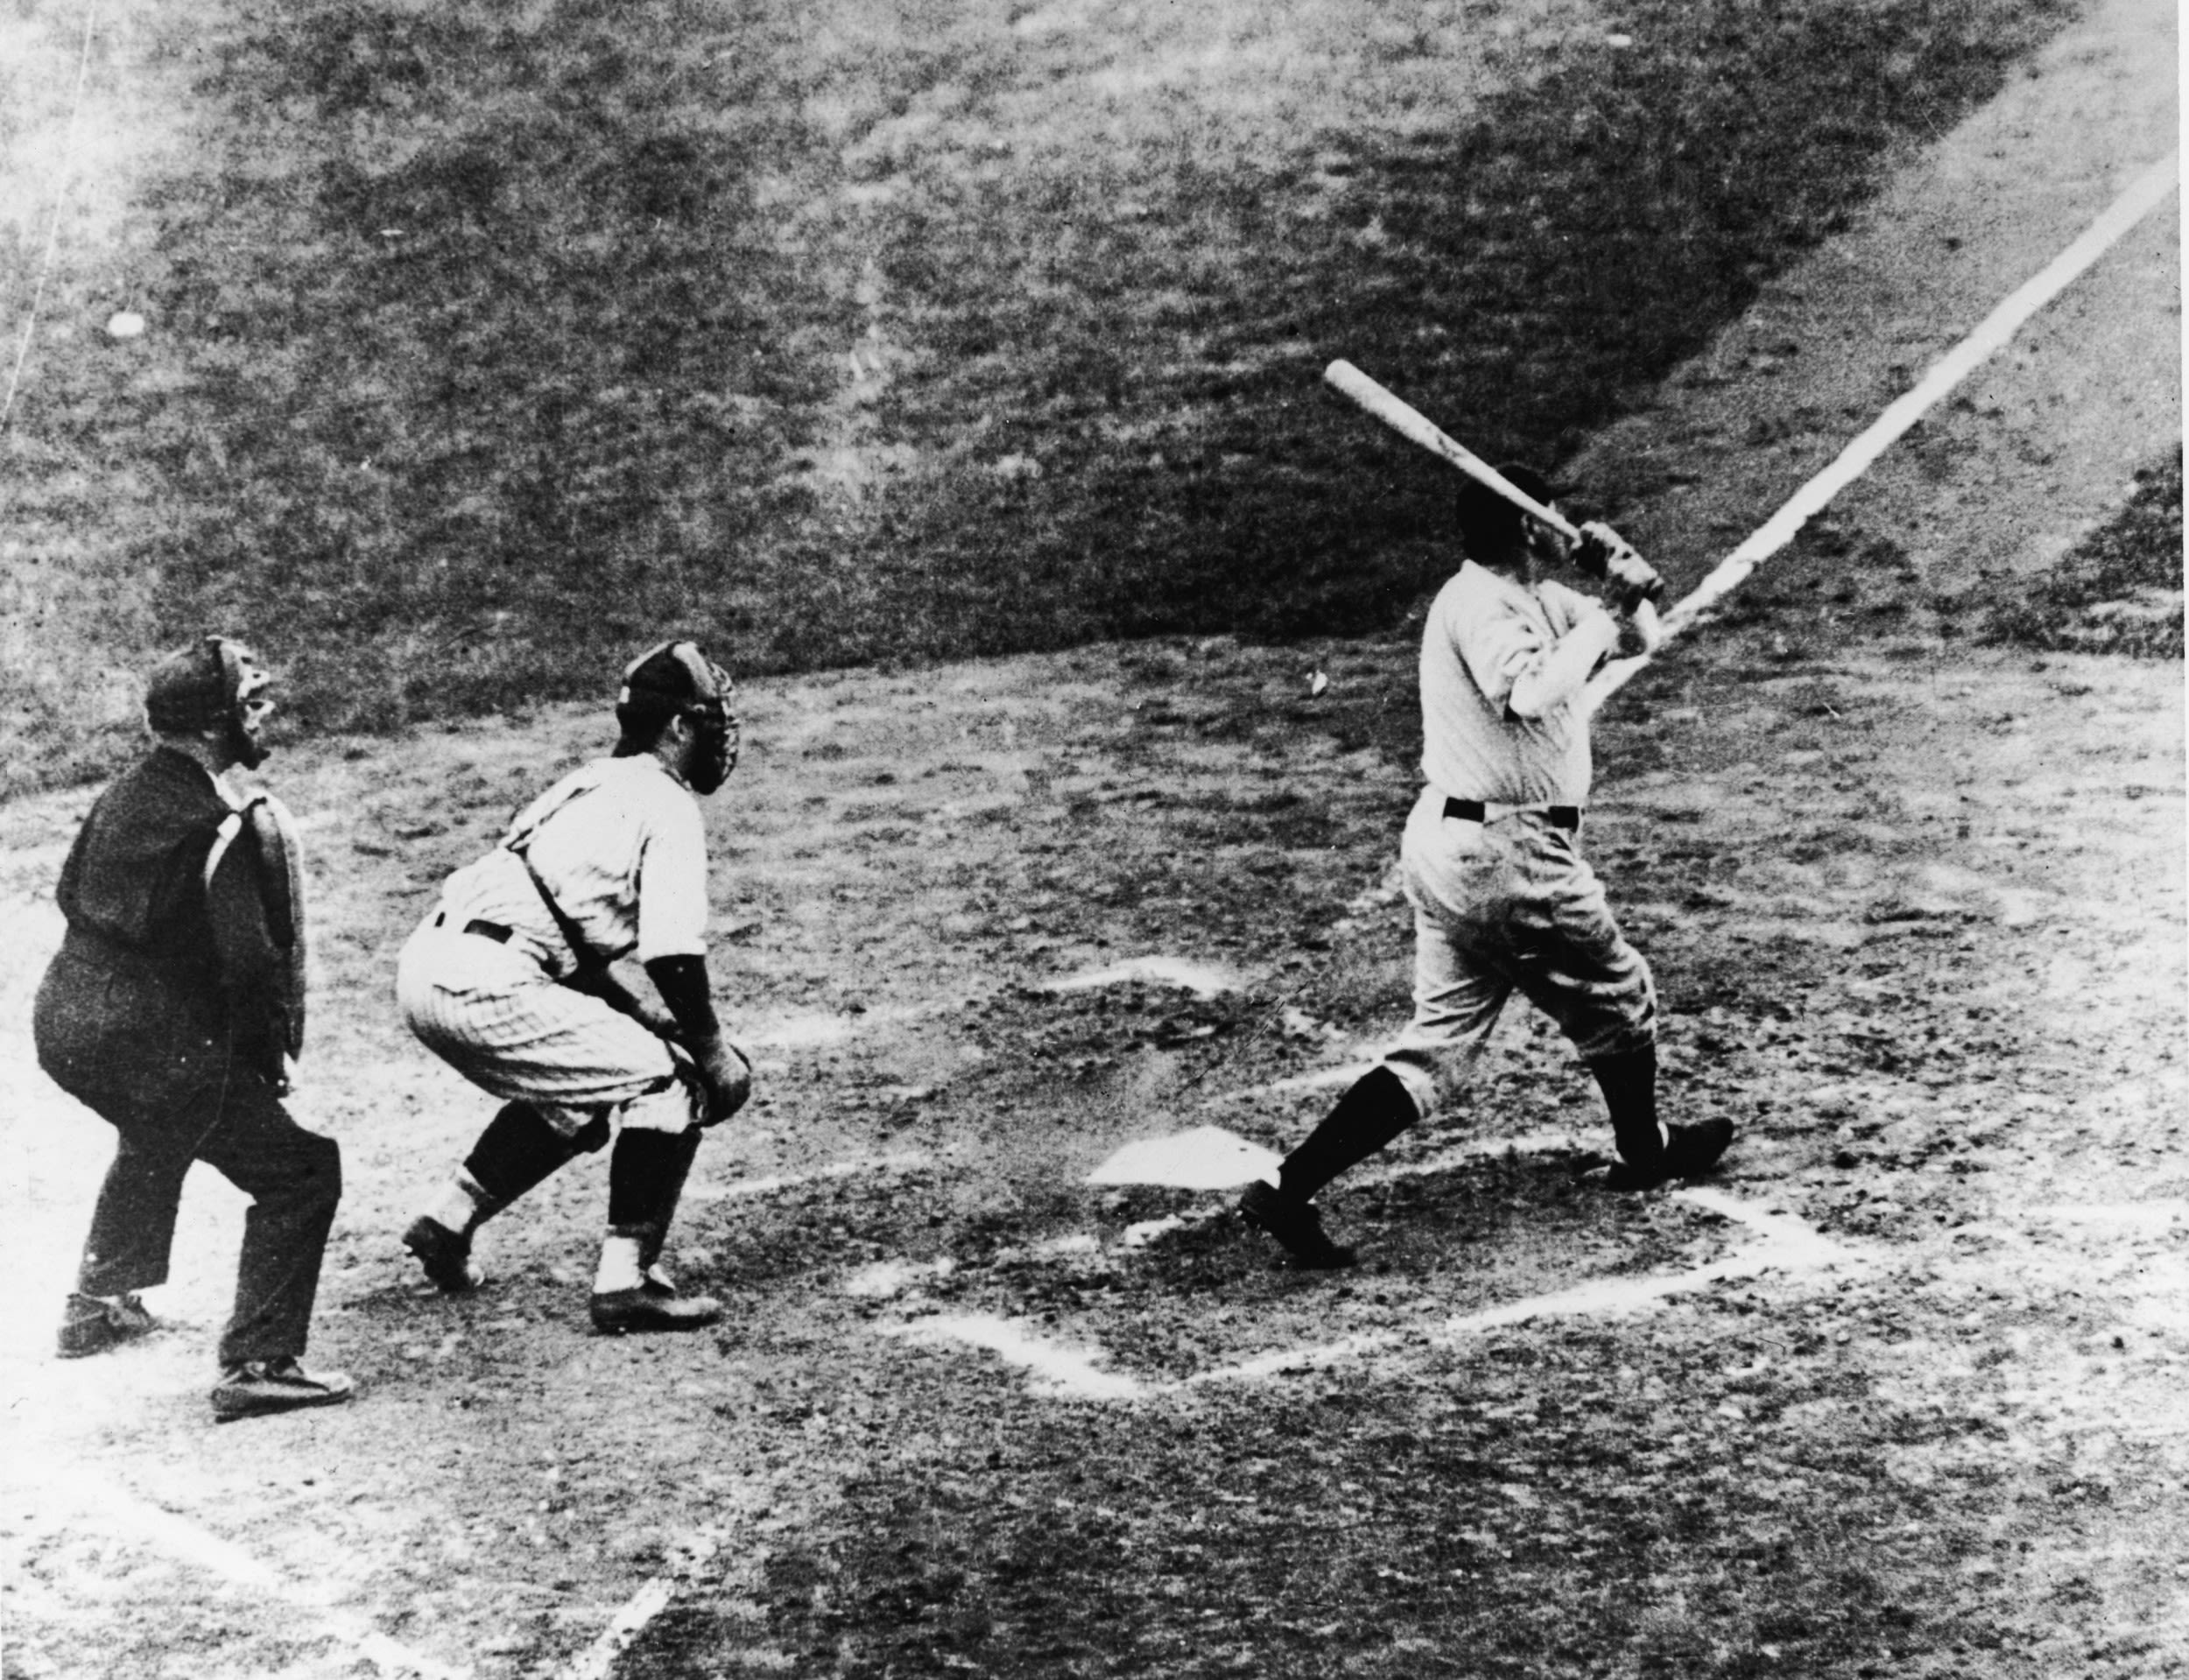 Babe Ruth's 'Called Shot' Yankees Jersey Looks to Make History at Auction